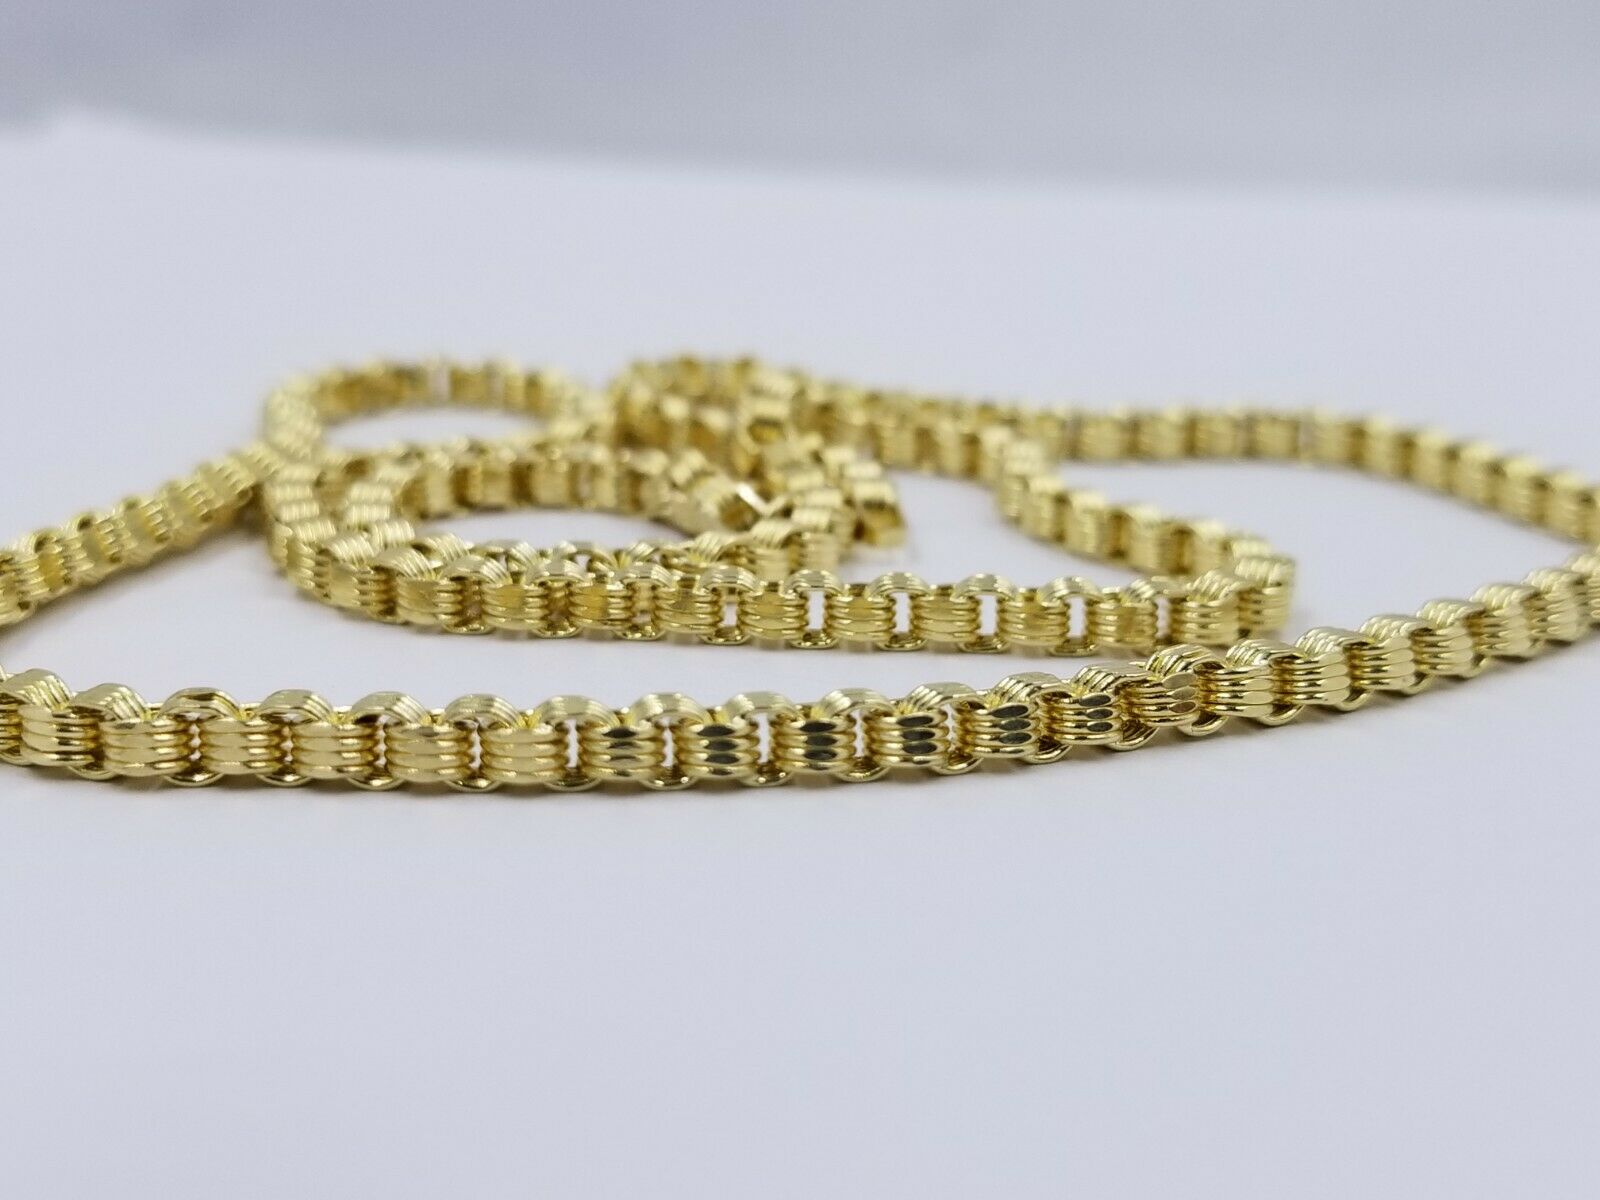 10 KT Yellow Gold Byzantine Box Chain Necklace 5mm 24 Inch Lobster Lock REAL 10K